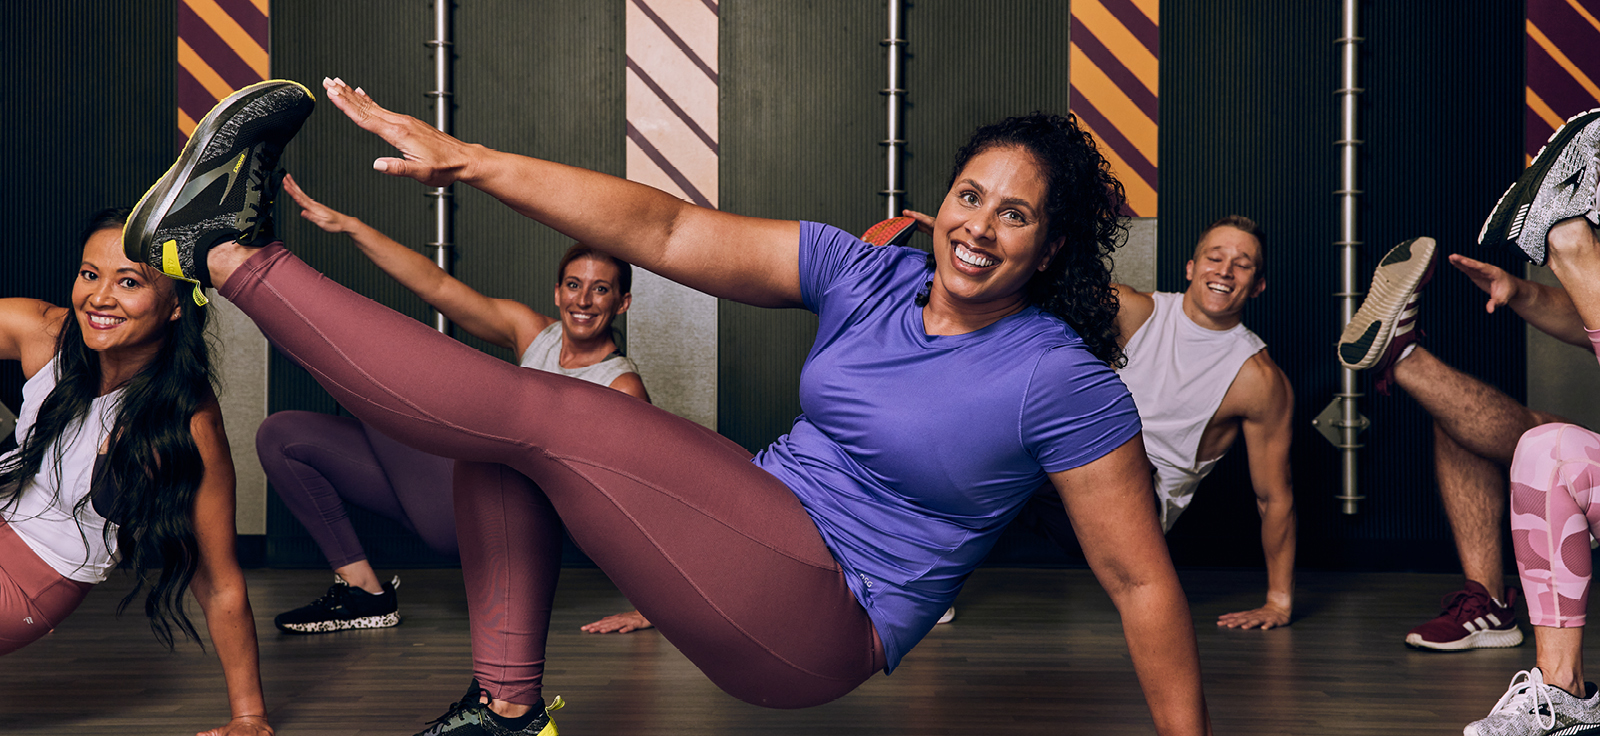 Crunch Fitness - Avondale: Read Reviews and Book Classes on ClassPass